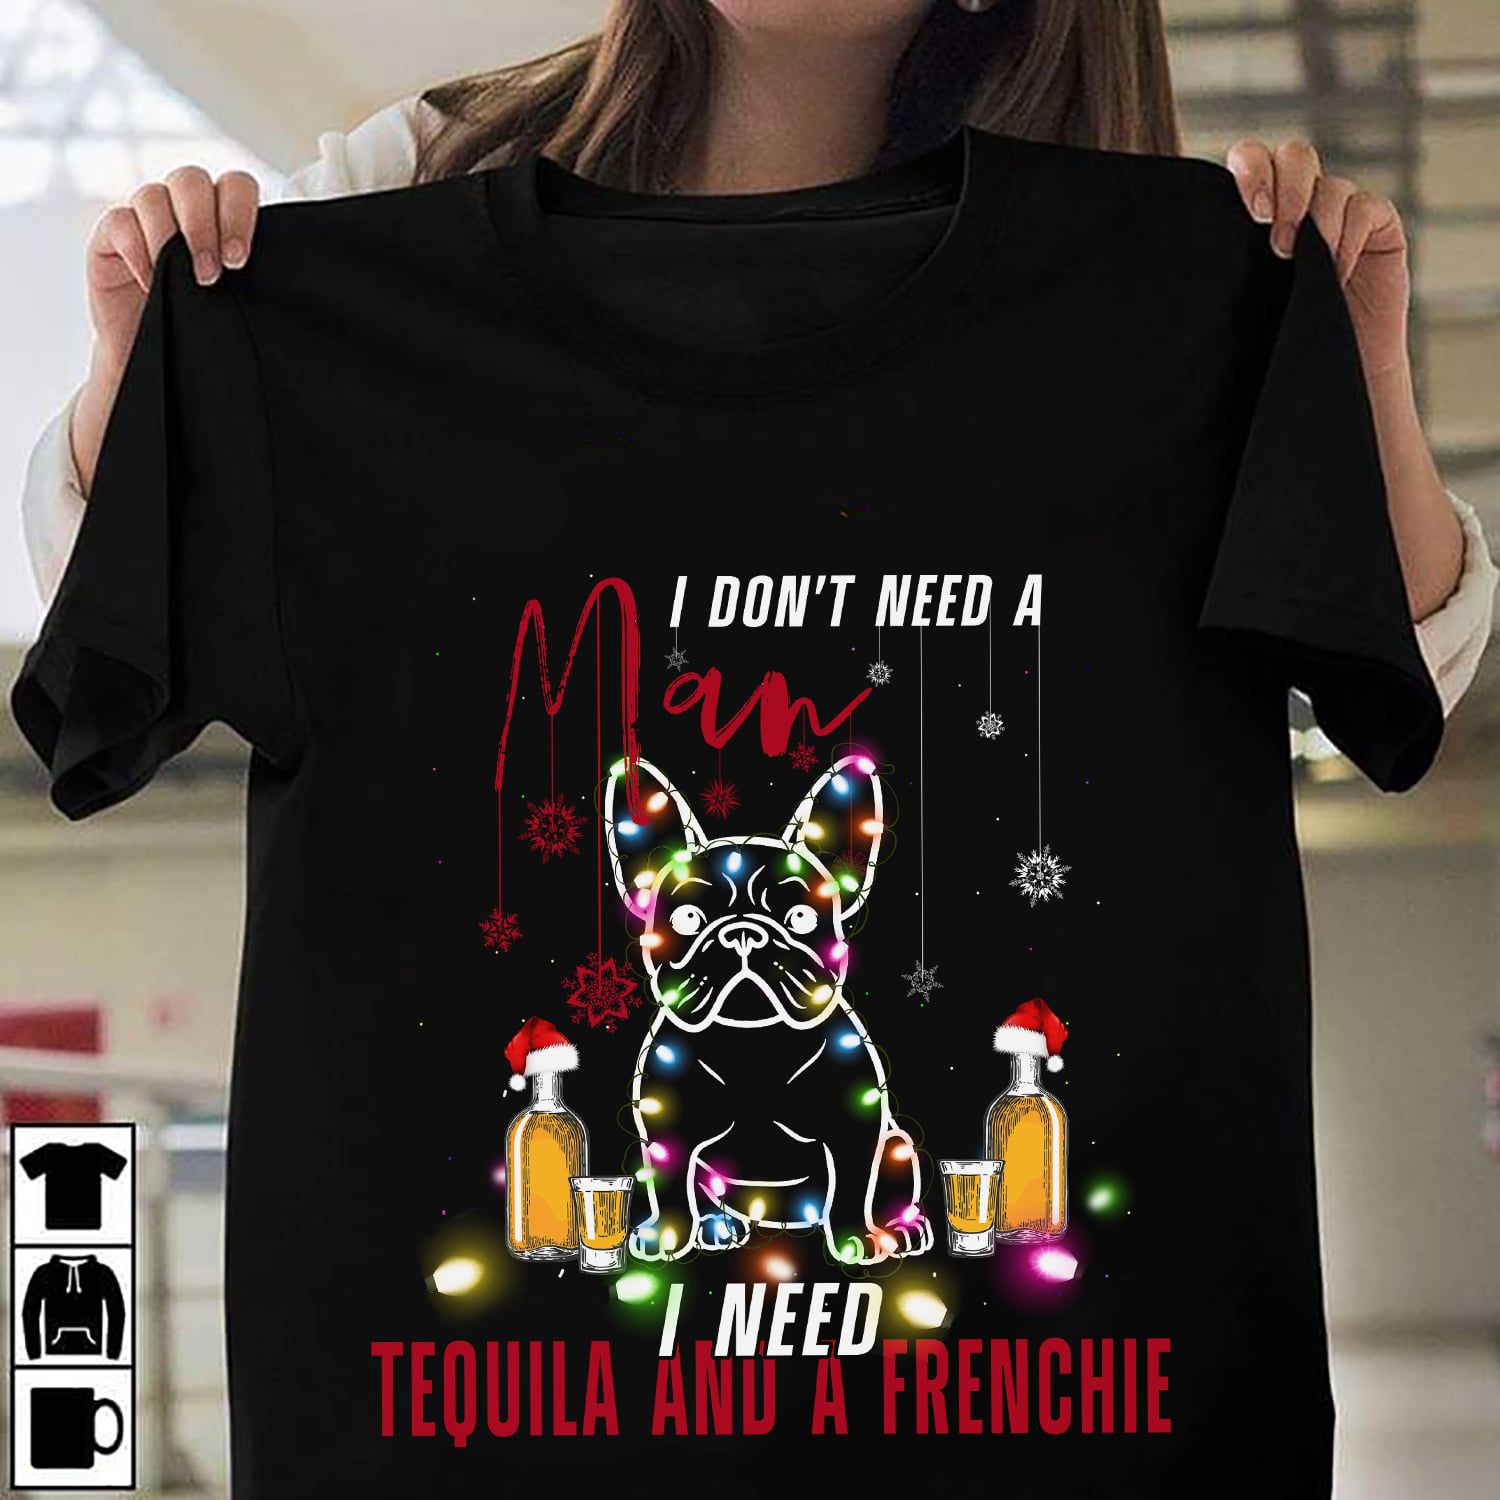 I don't need a man I need Tequila and a Frenchie - Christmas day ugly sweater, Tequila wine for Christmas